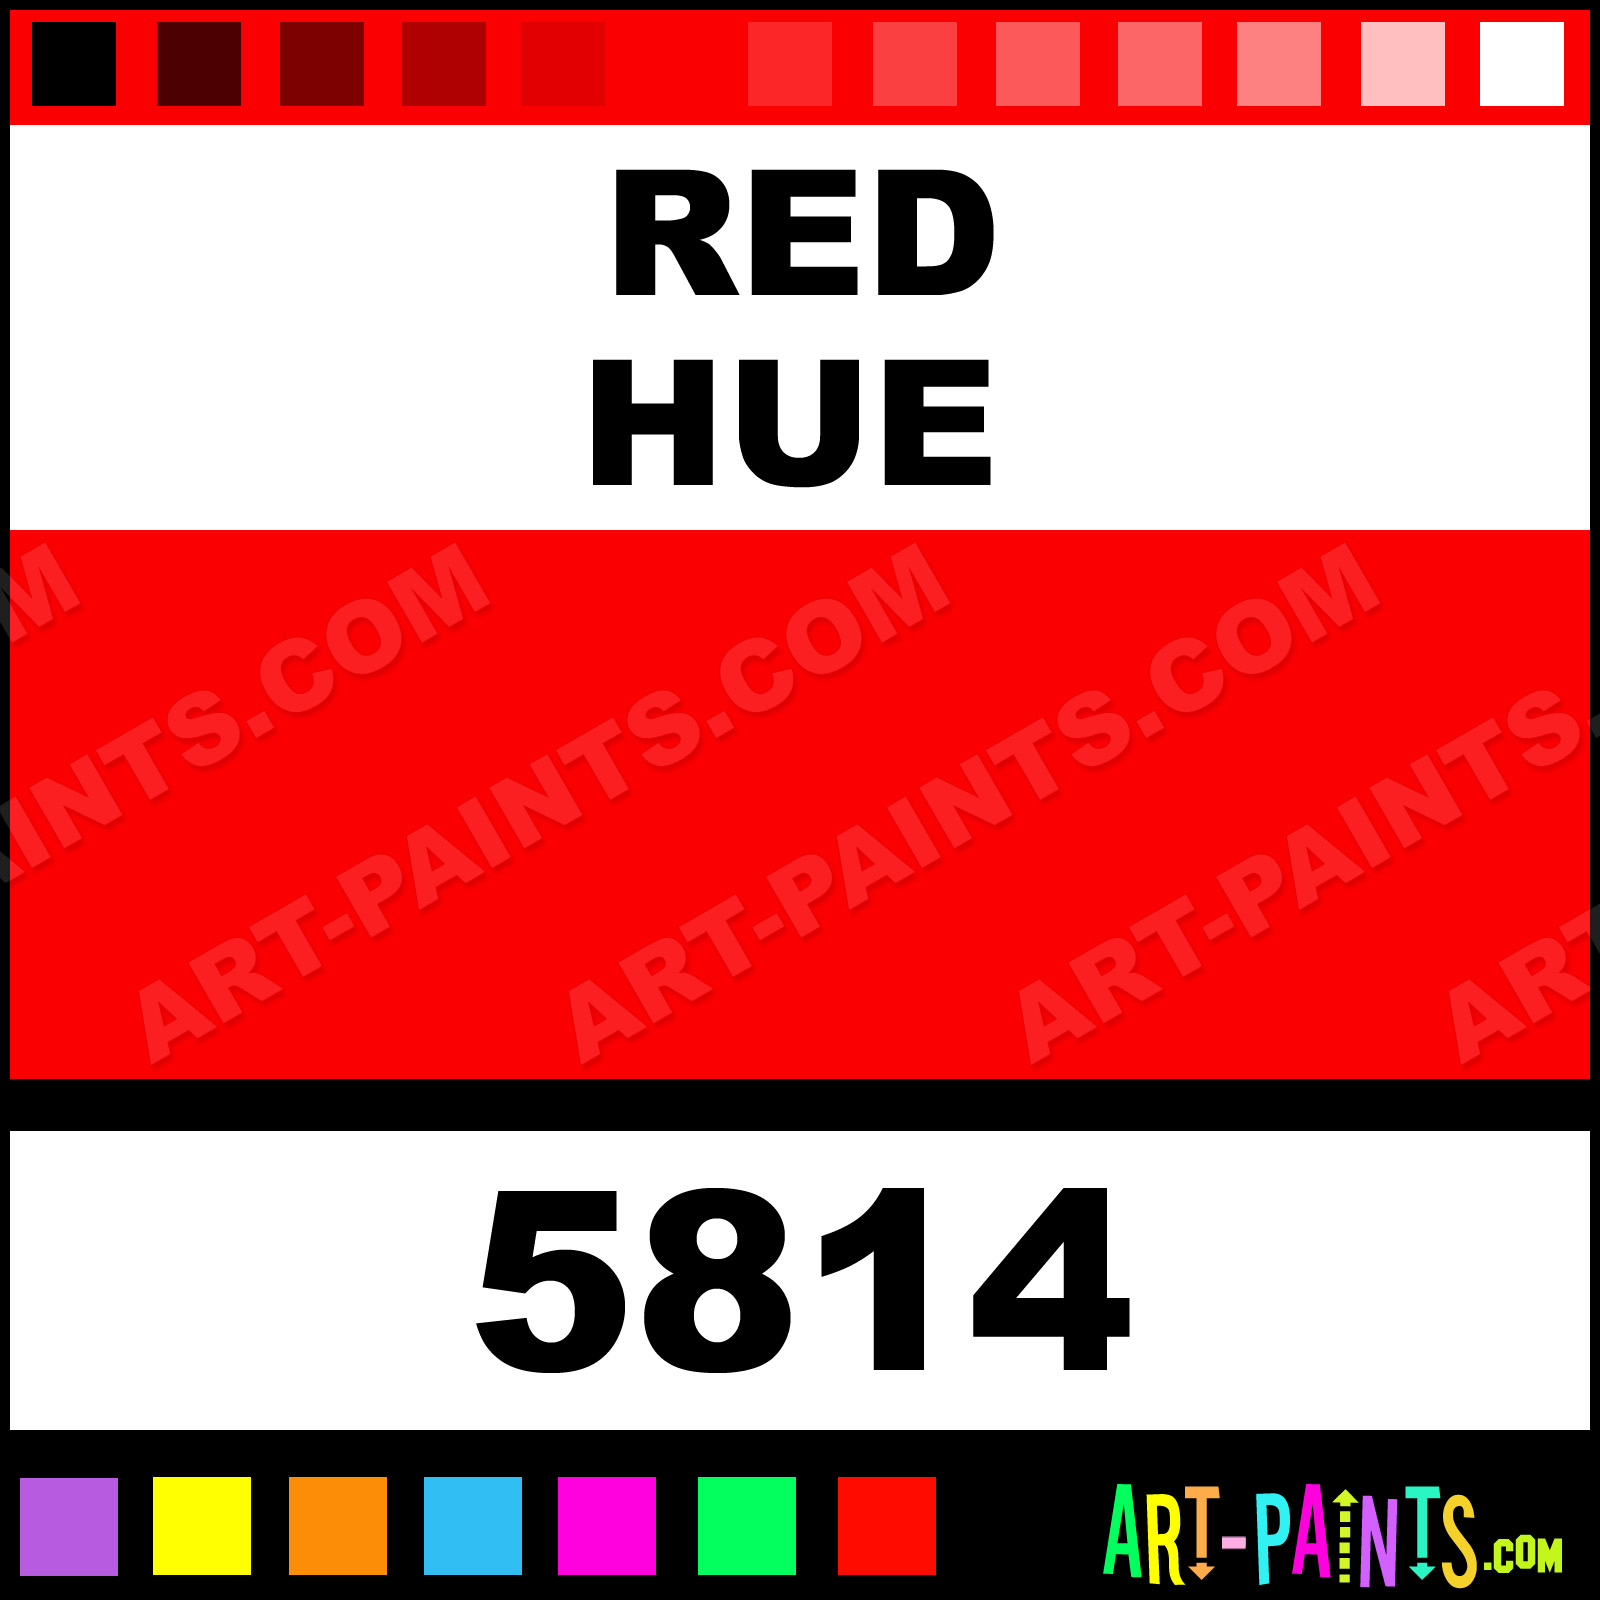 PAINT, FECON RED, SPRAY (BRANDED)